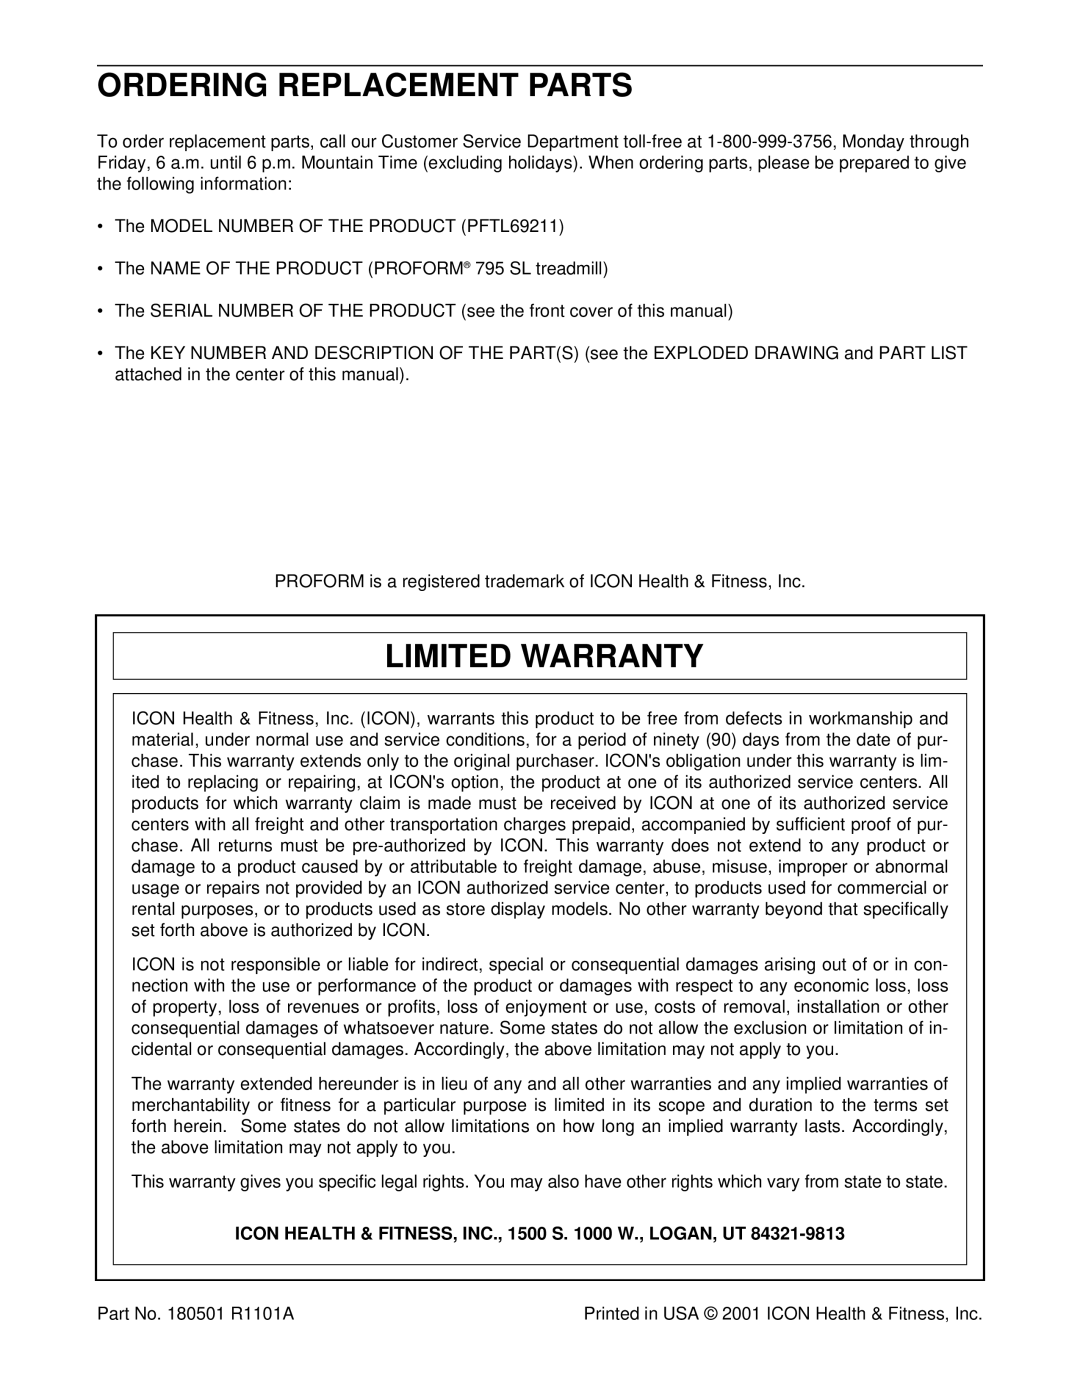 ProForm PFTL69211 Ordering Replacement Parts, Limited Warranty, ICON HEALTH & FITNESS, INC., 1500 S. 1000 W., LOGAN, UT 